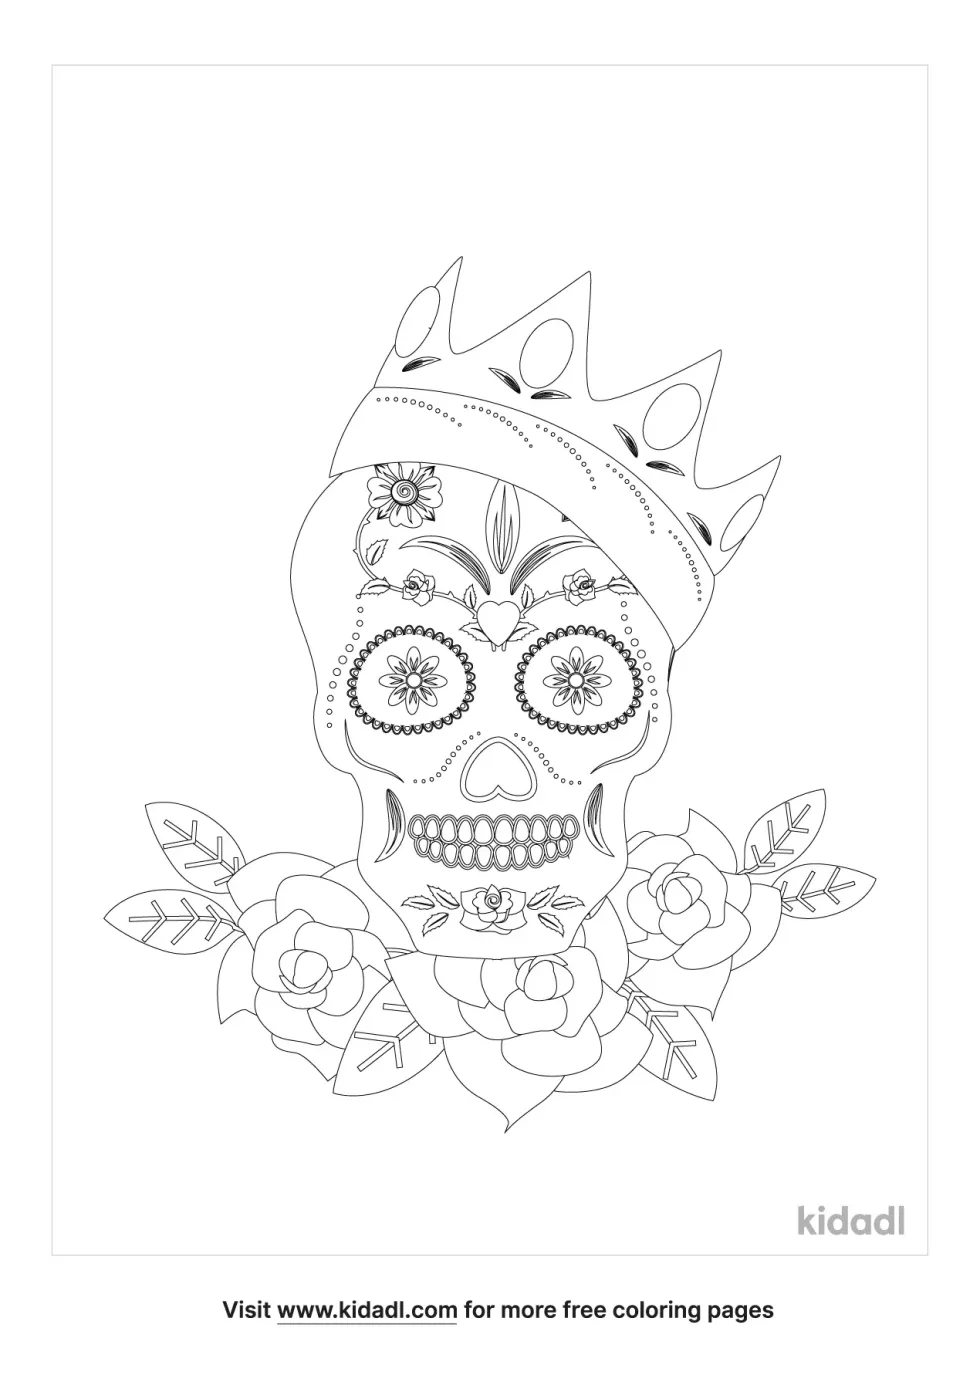 Skull, Crown And Roses